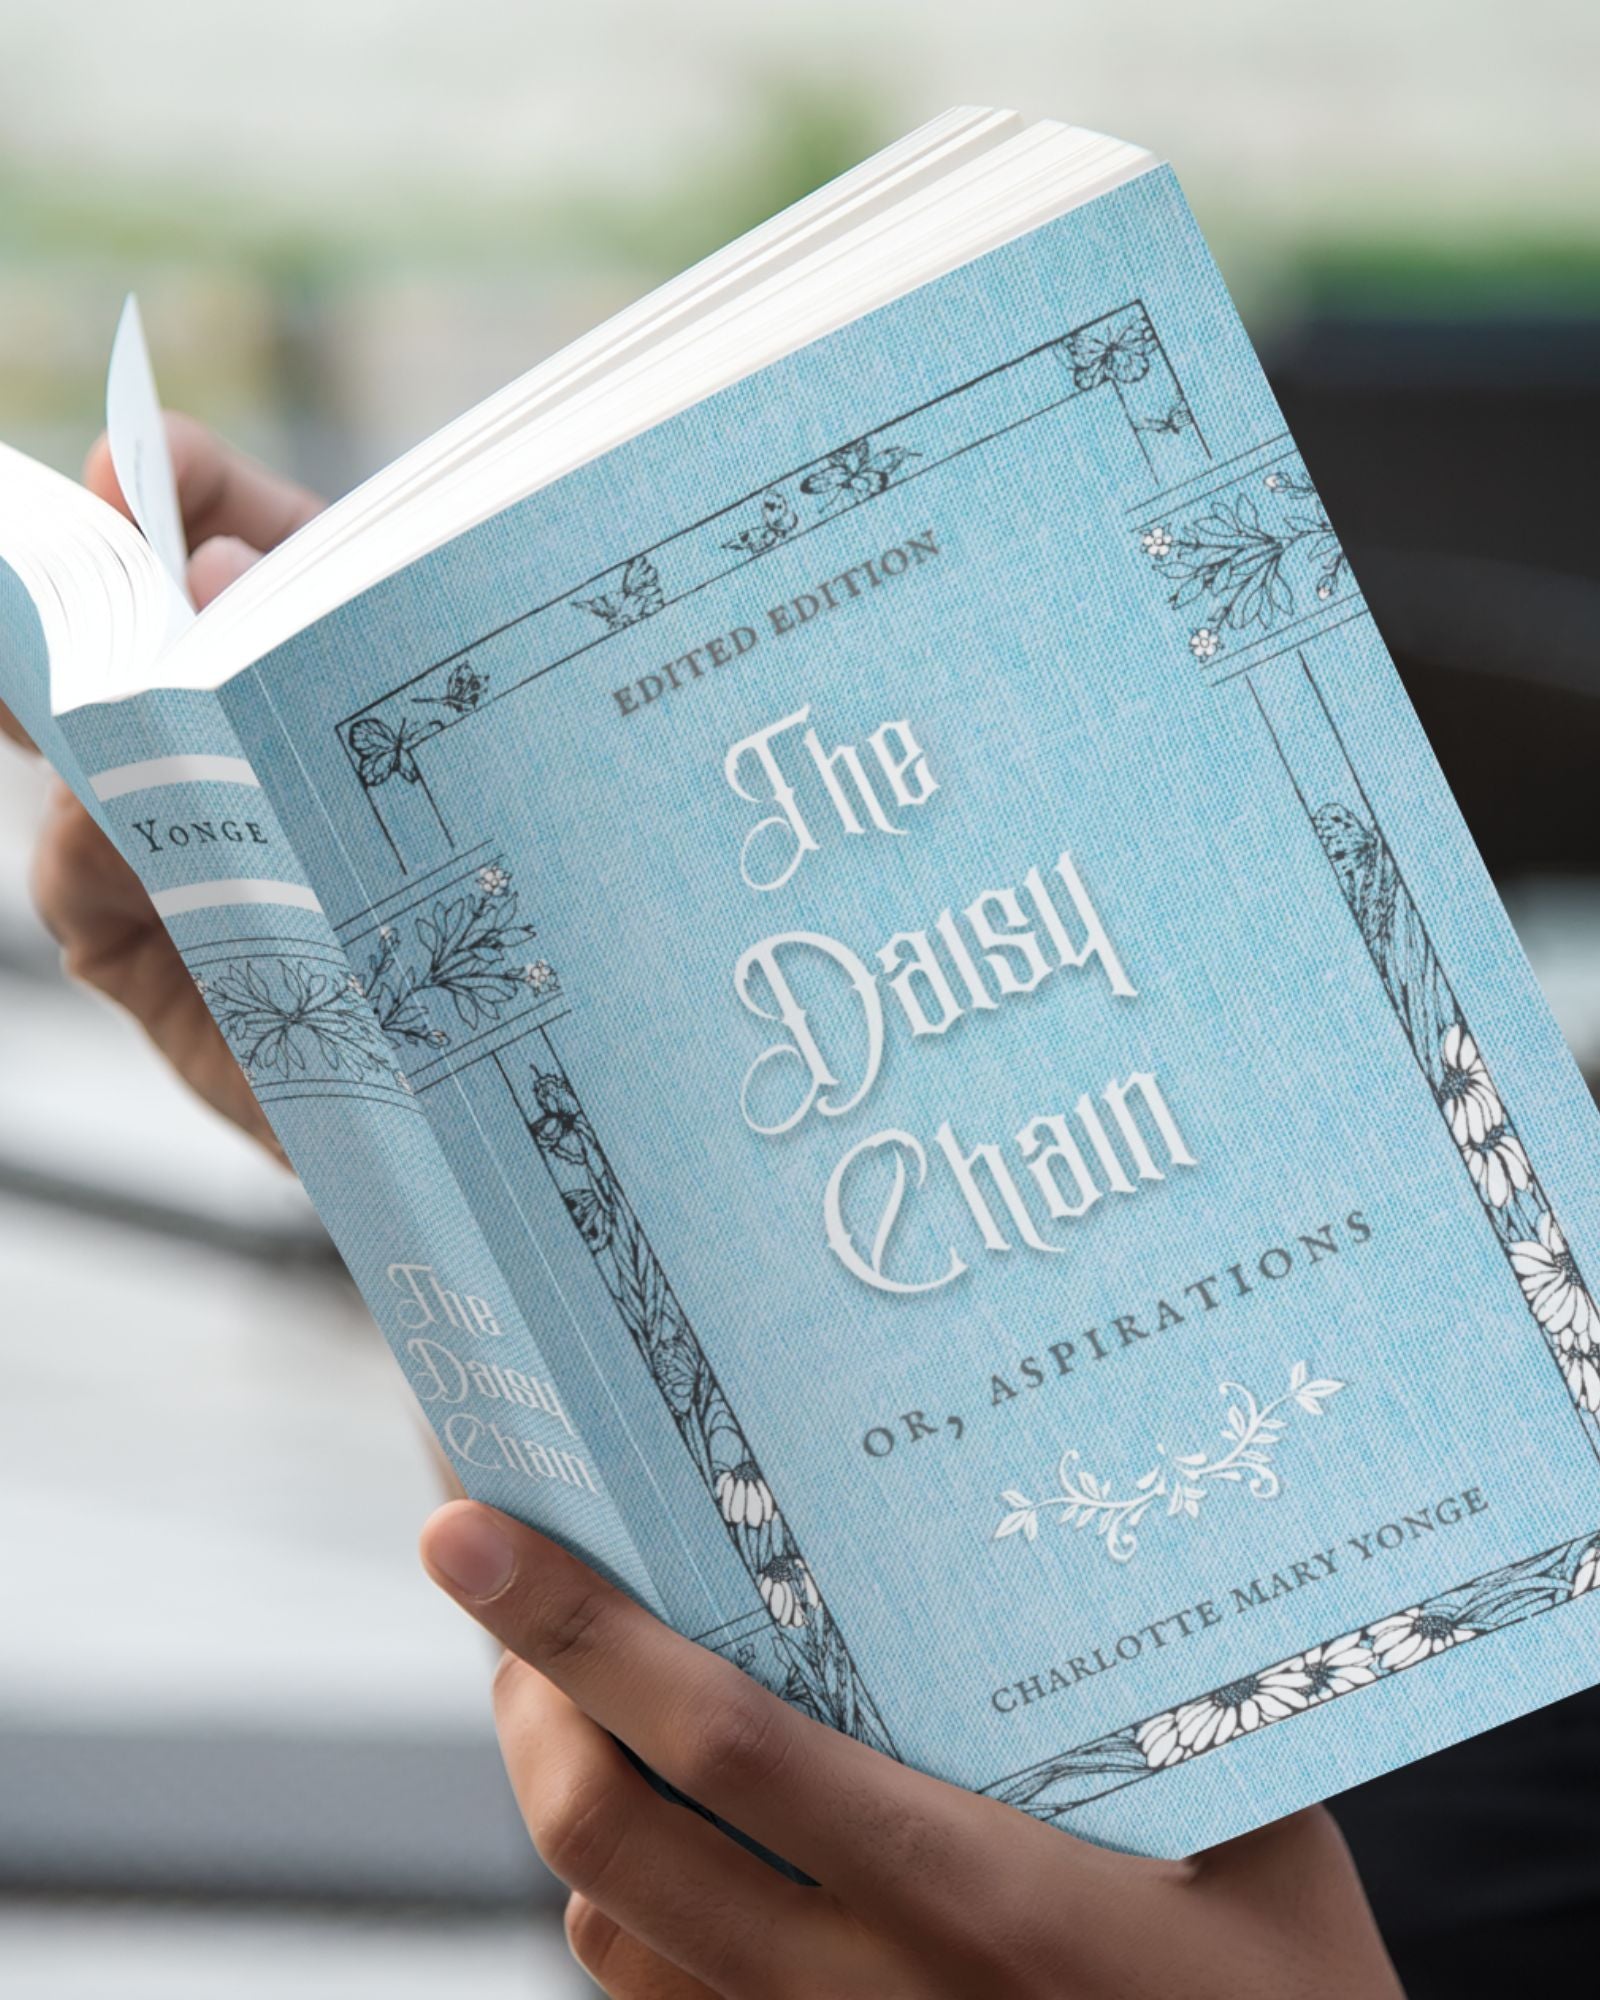 The paperback edition of The Daisy Chain or, Aspirations is being held open by white hands in front of a blurred background.